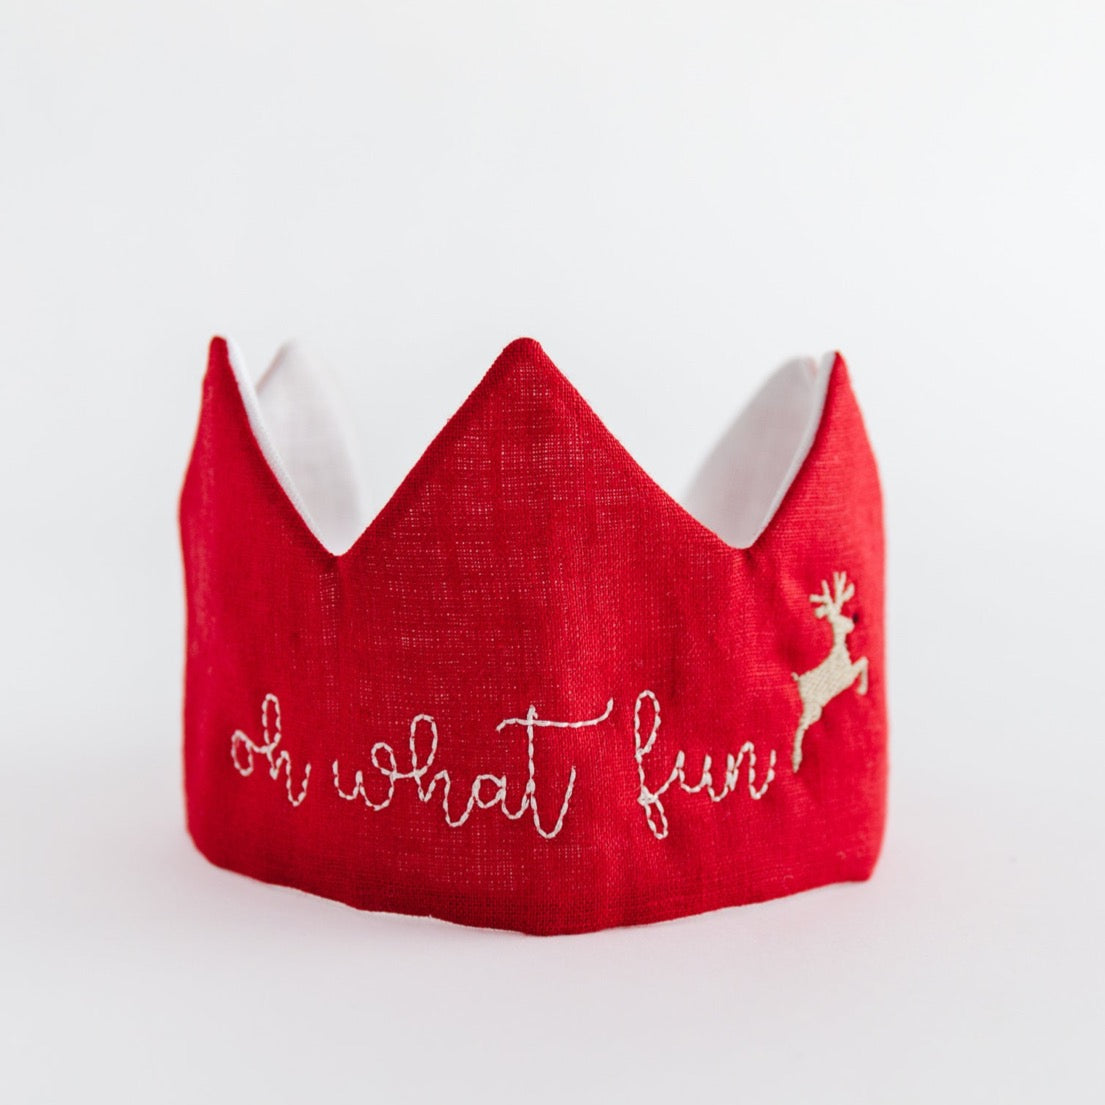 Christmas Crown | "Absolutely adorable, great quality, too!"